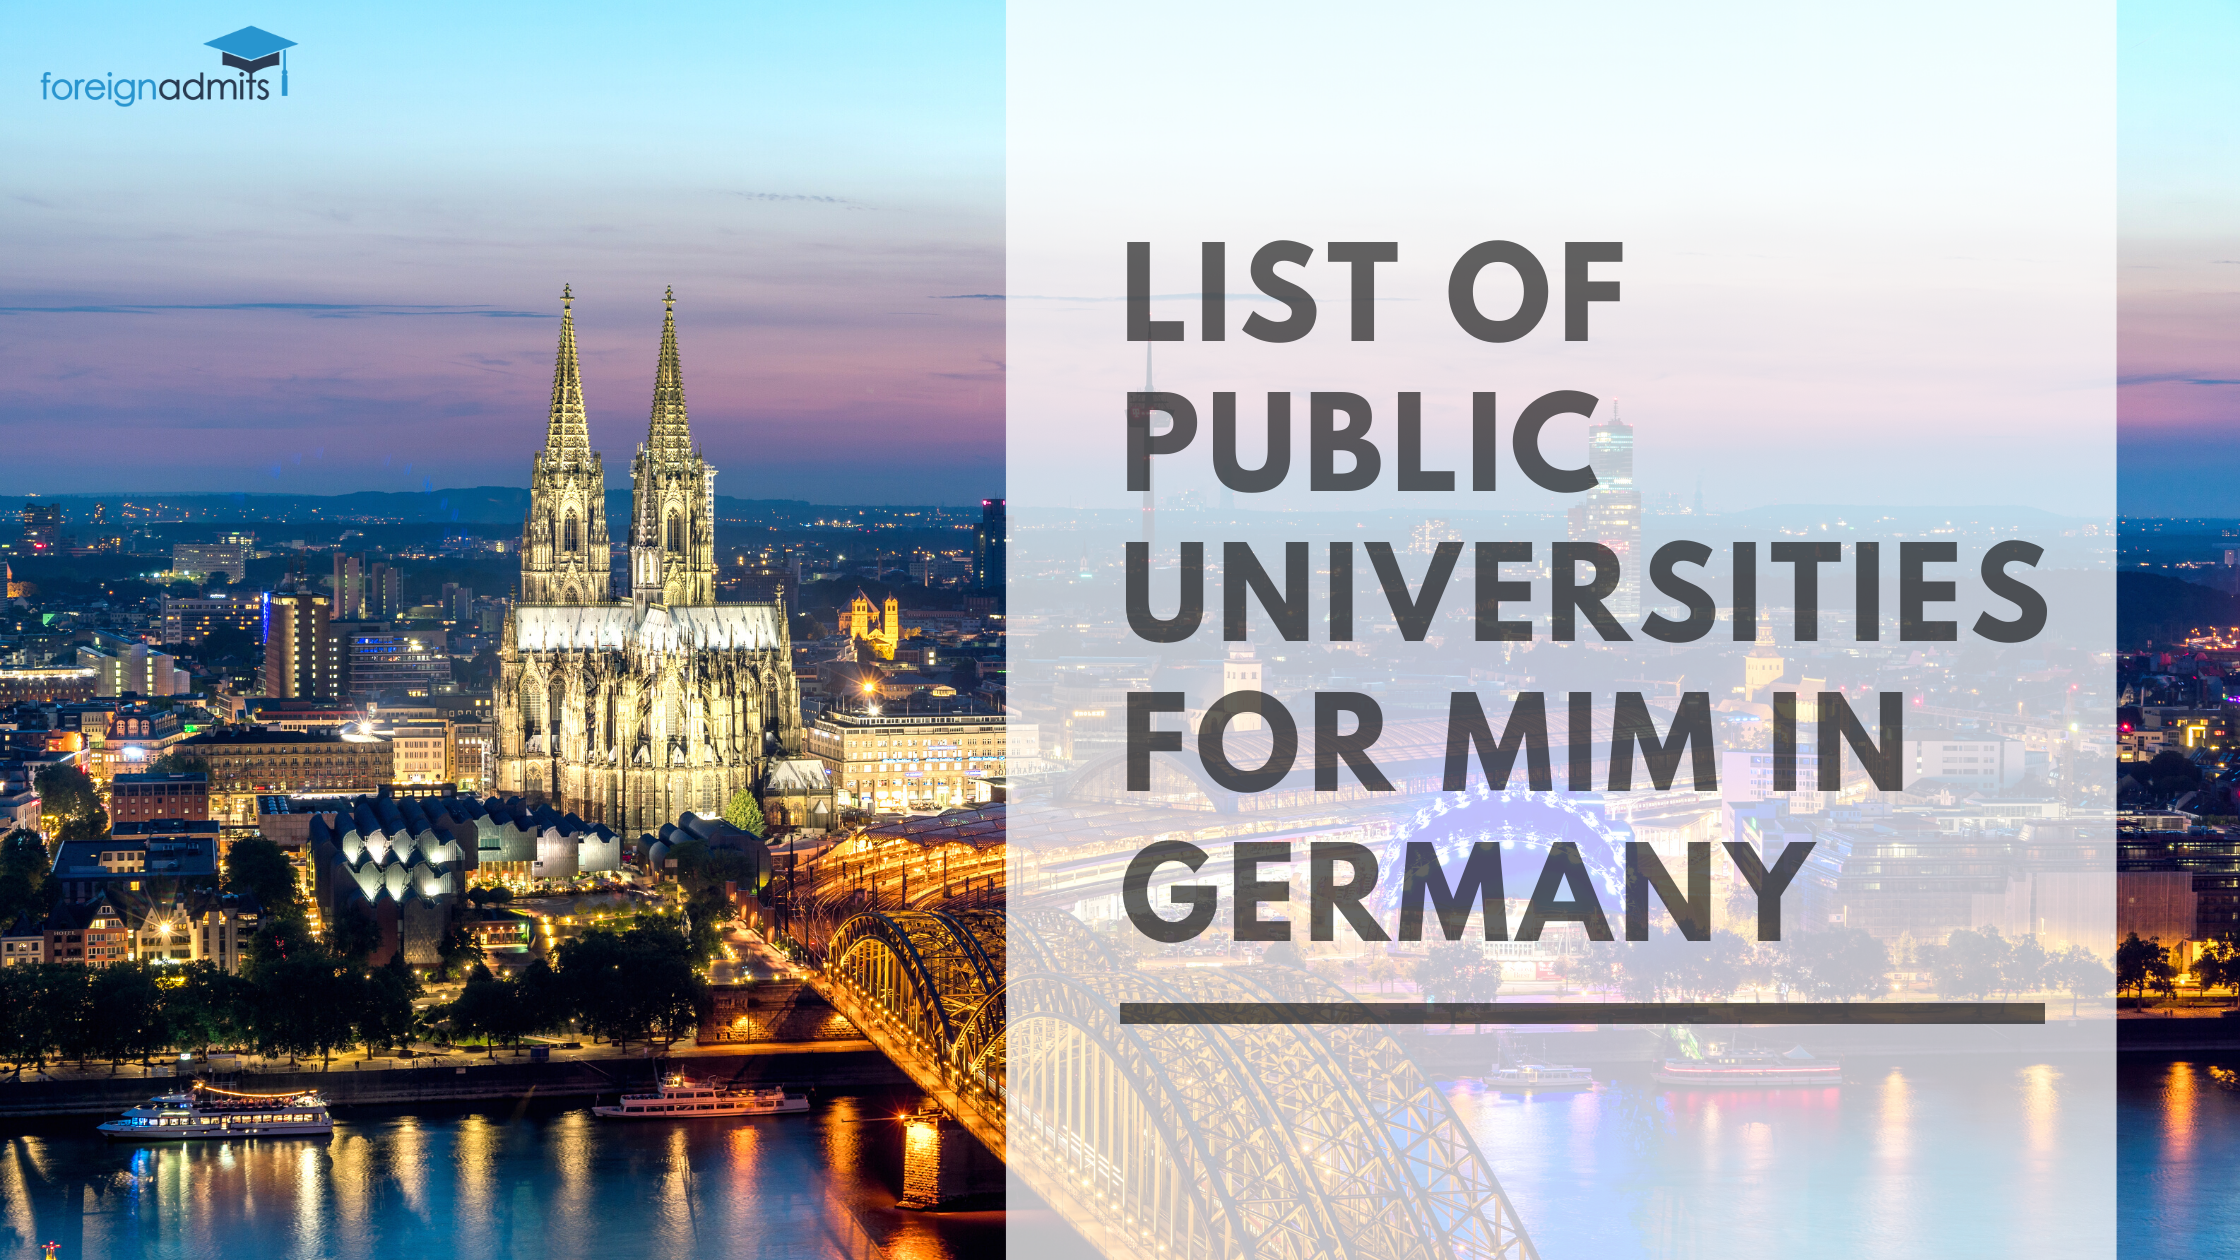 List of public universities for MiM in Germany